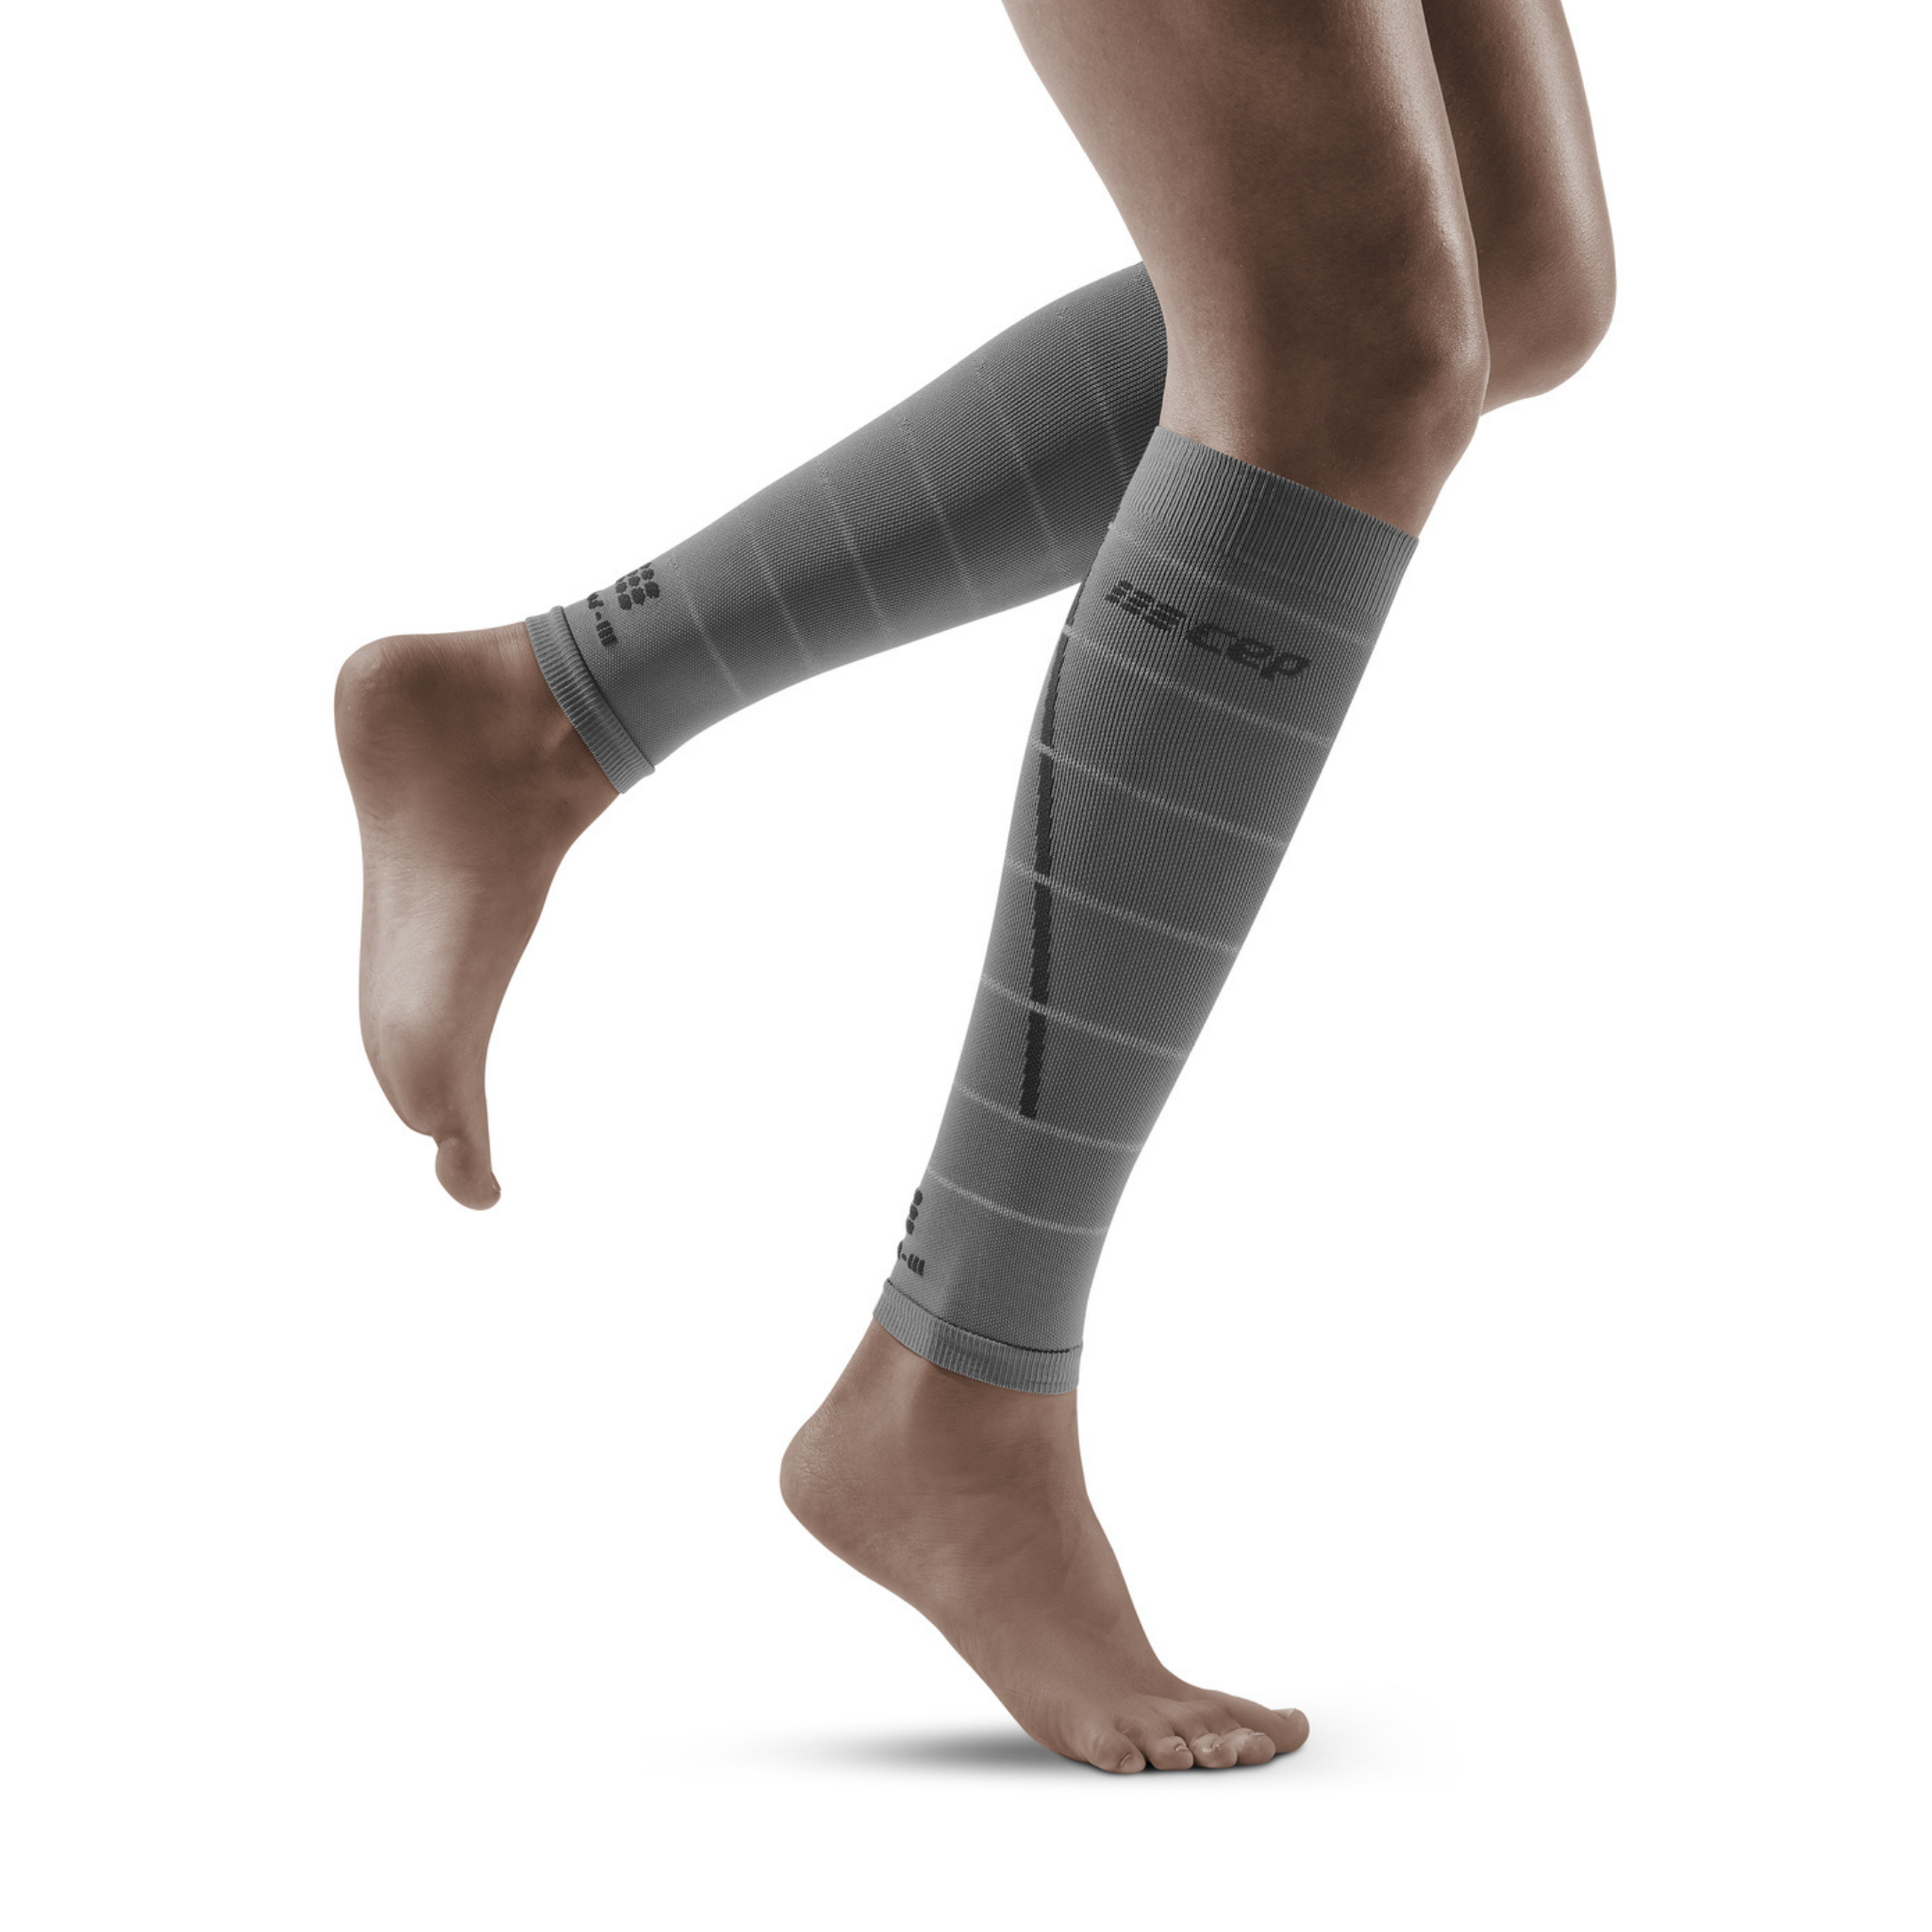 Best Deal for Modetro Sports Calf Compression Sleeve - Leg Sleeves